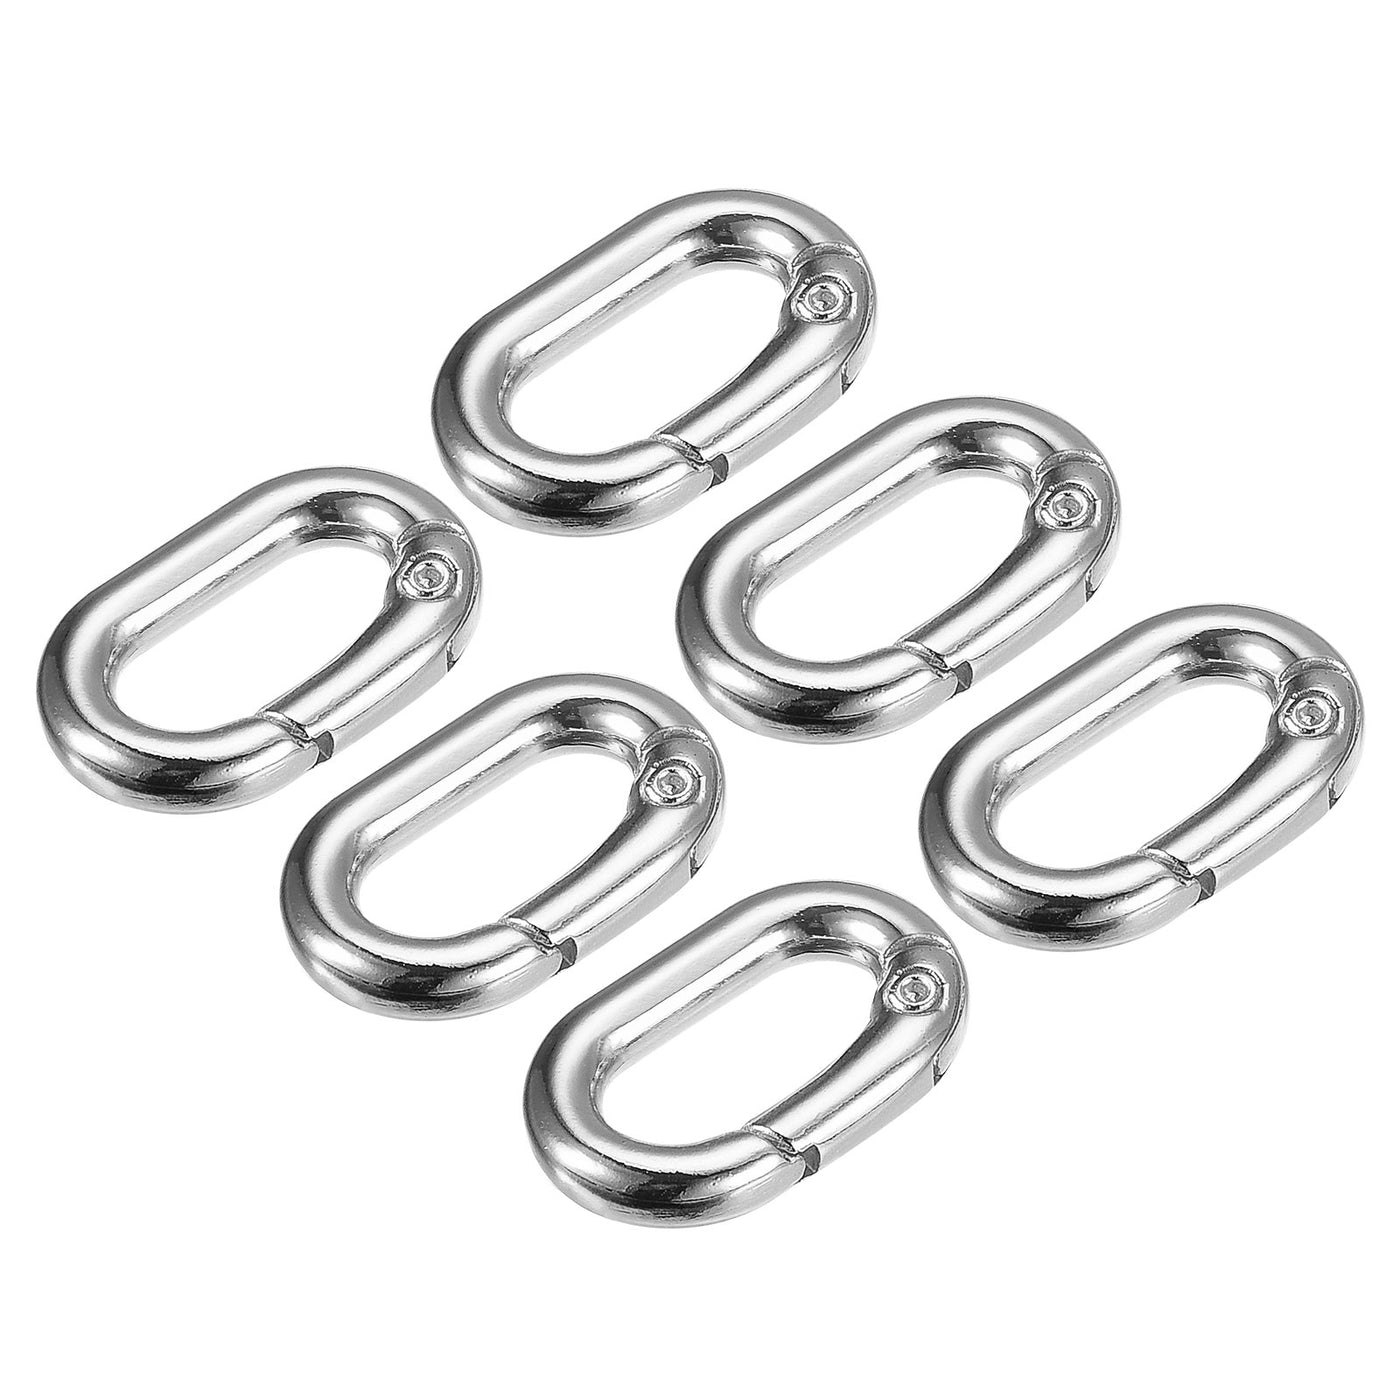 uxcell Uxcell 0.98" Spring Oval Ring Snap Clip Trigger for Bag Purse Keychain, 6Pcs Silver